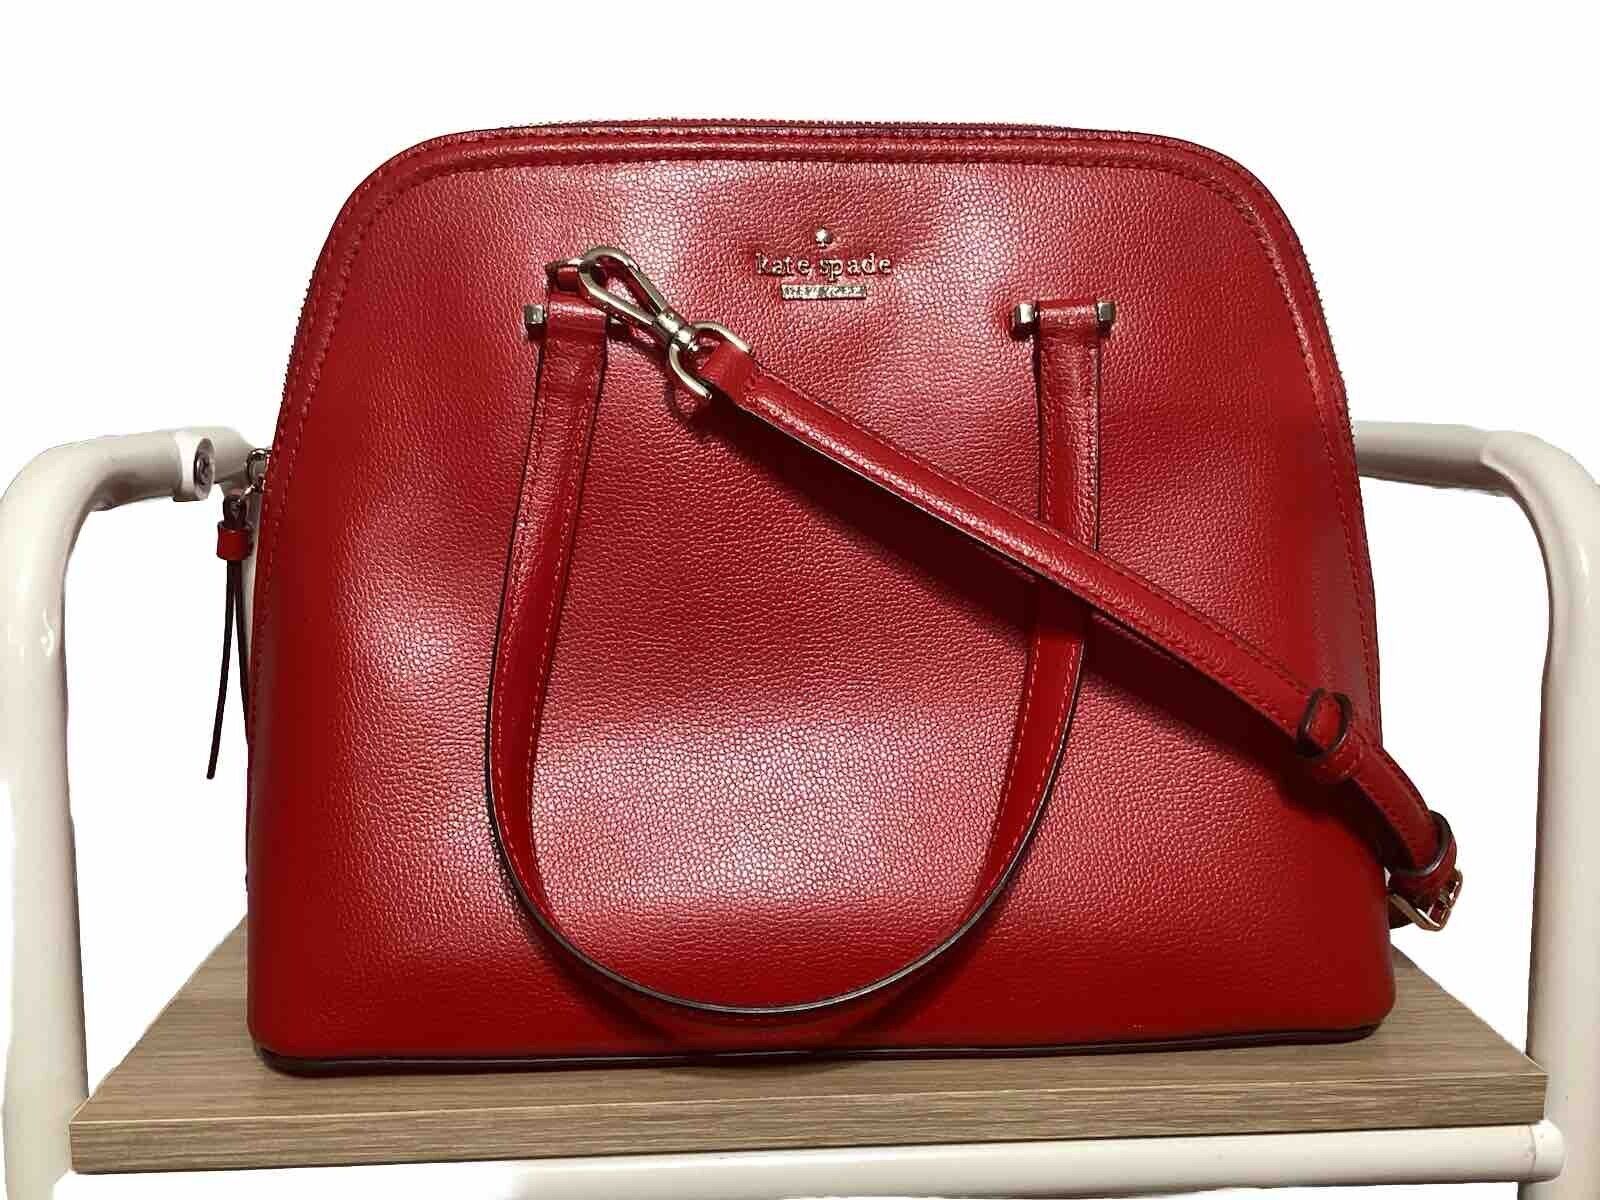 Authentic KATE SPADE RED SATCHEL MEDIUM DOME stunning inner lining NWOT